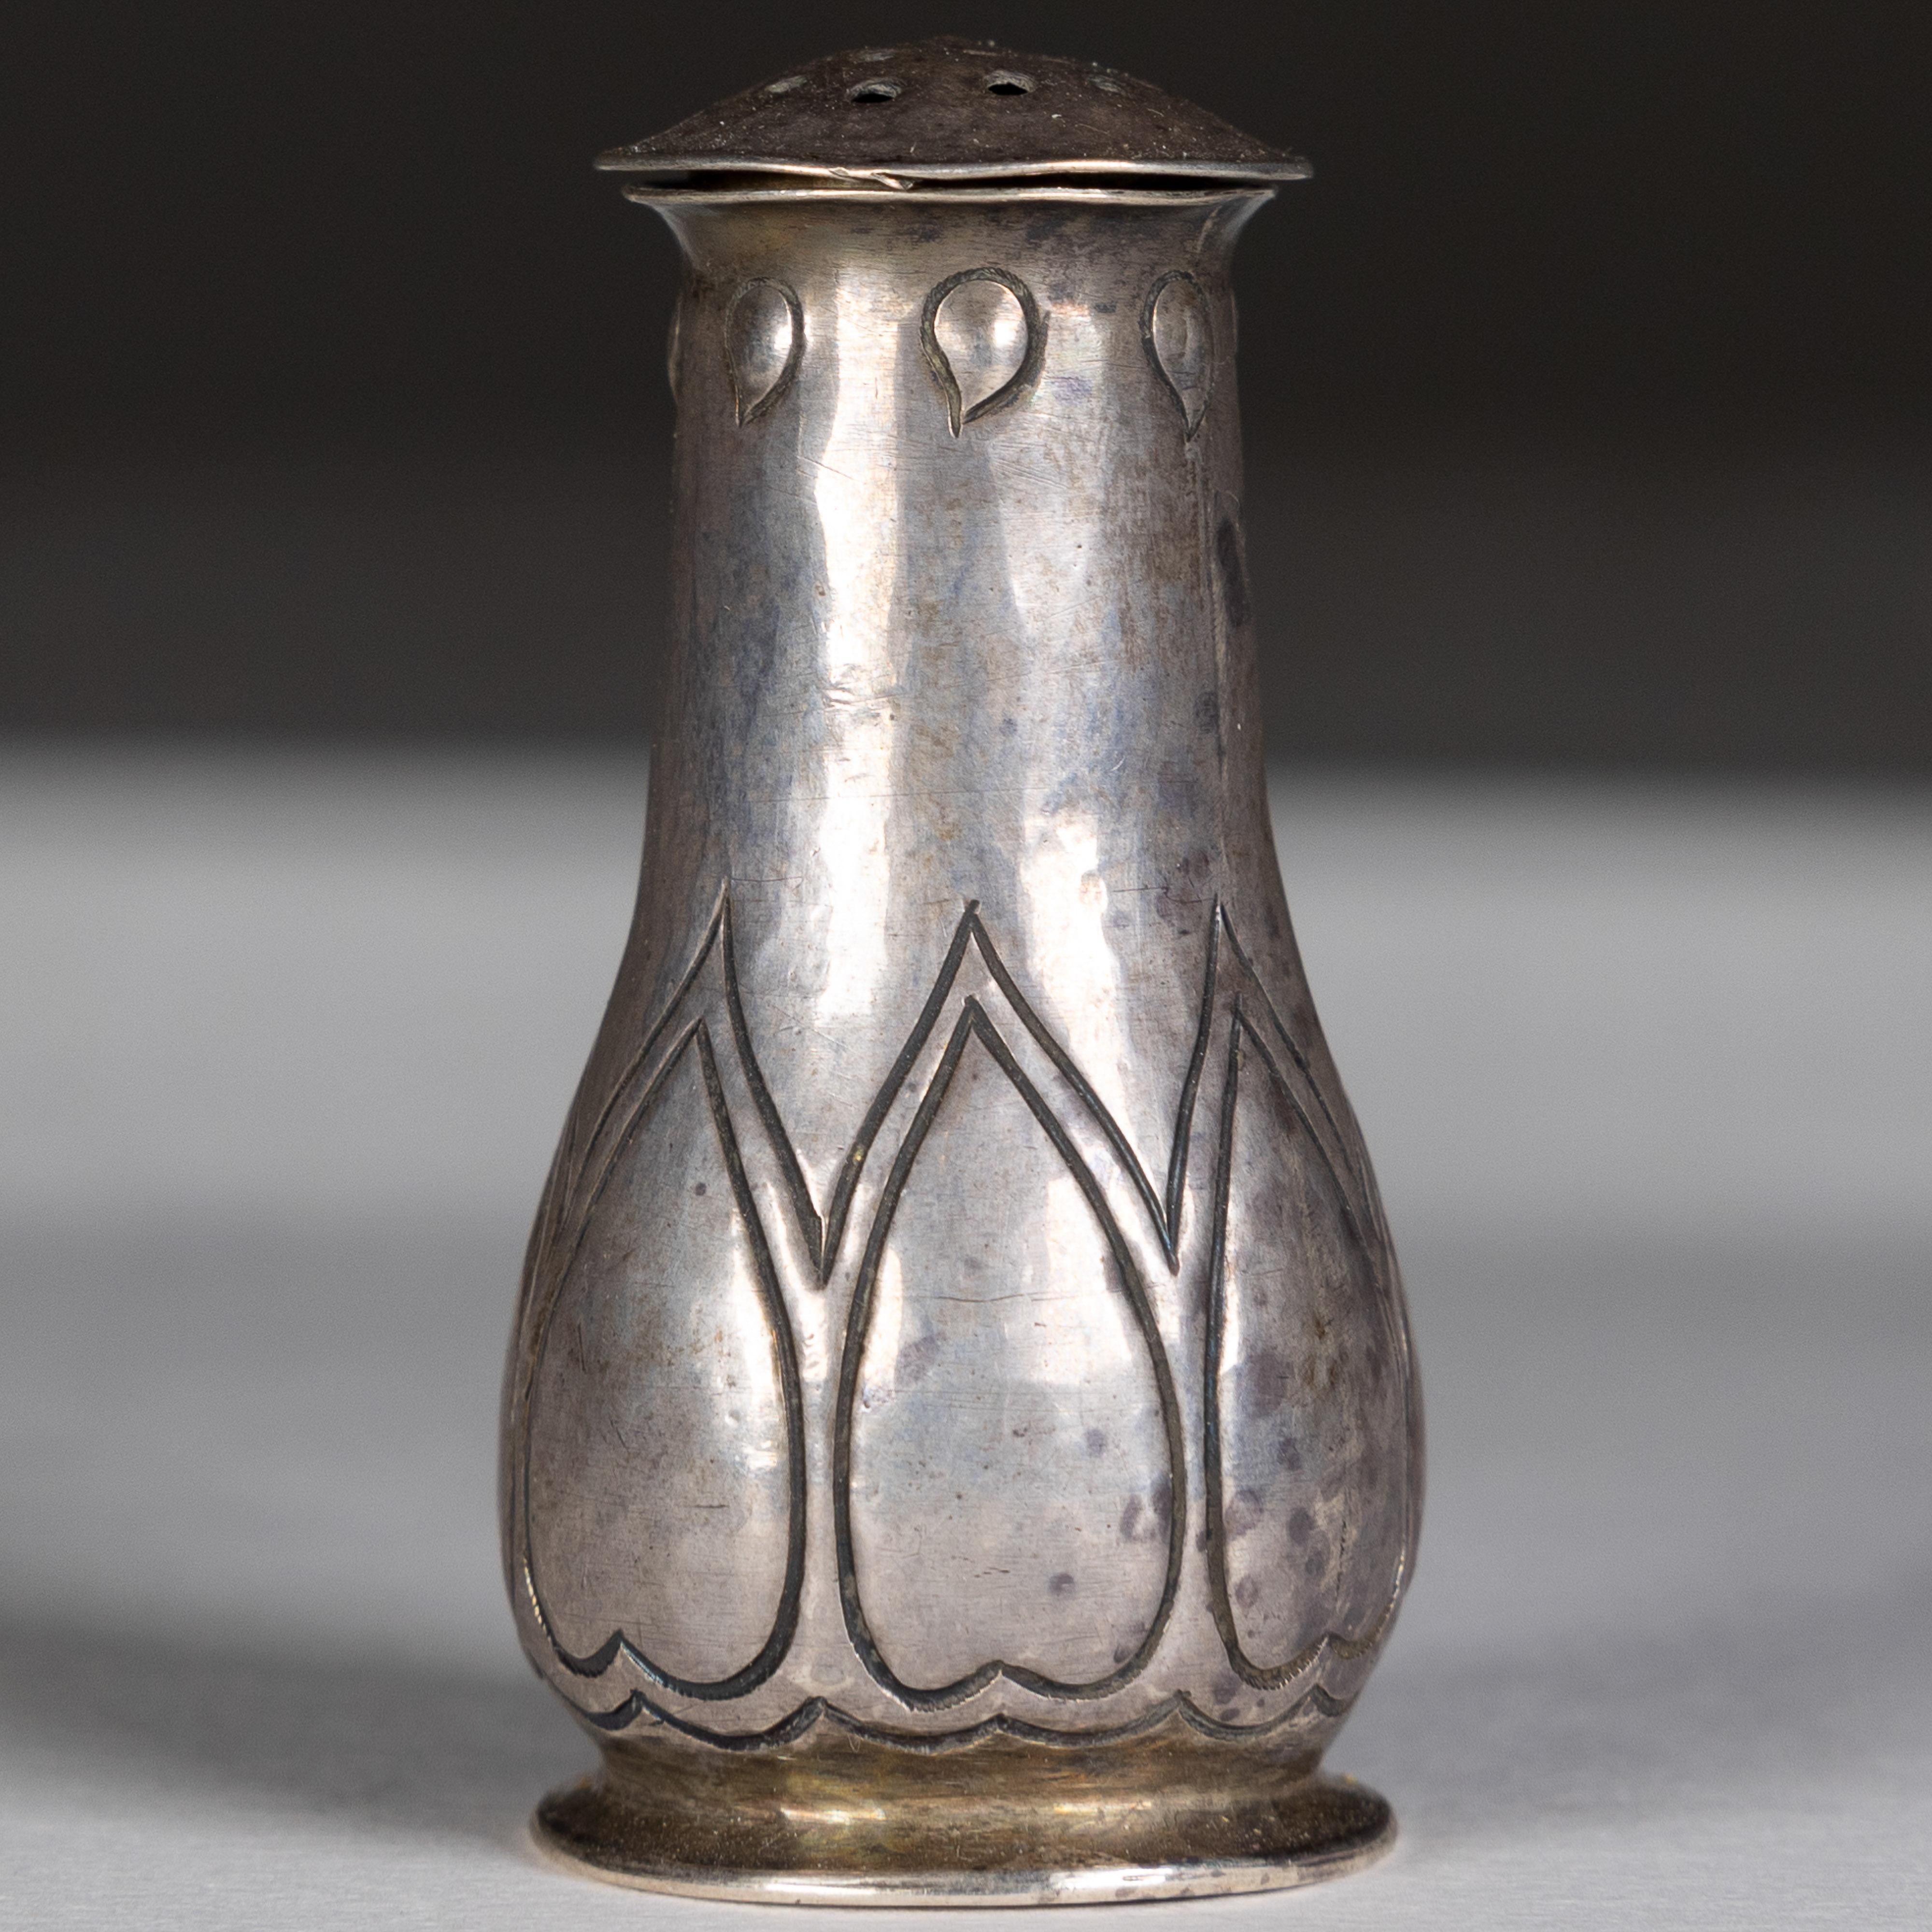 C.F.A. Voysey attributed. 
Made by the Keswick School of Industrial Art.
An Arts and Crafts silver salt shaker
Handmade with stylized heart decoration, with a pierced removable lid. Stamped maker’s and hallmarks K.S.I.A. Chester, Circa